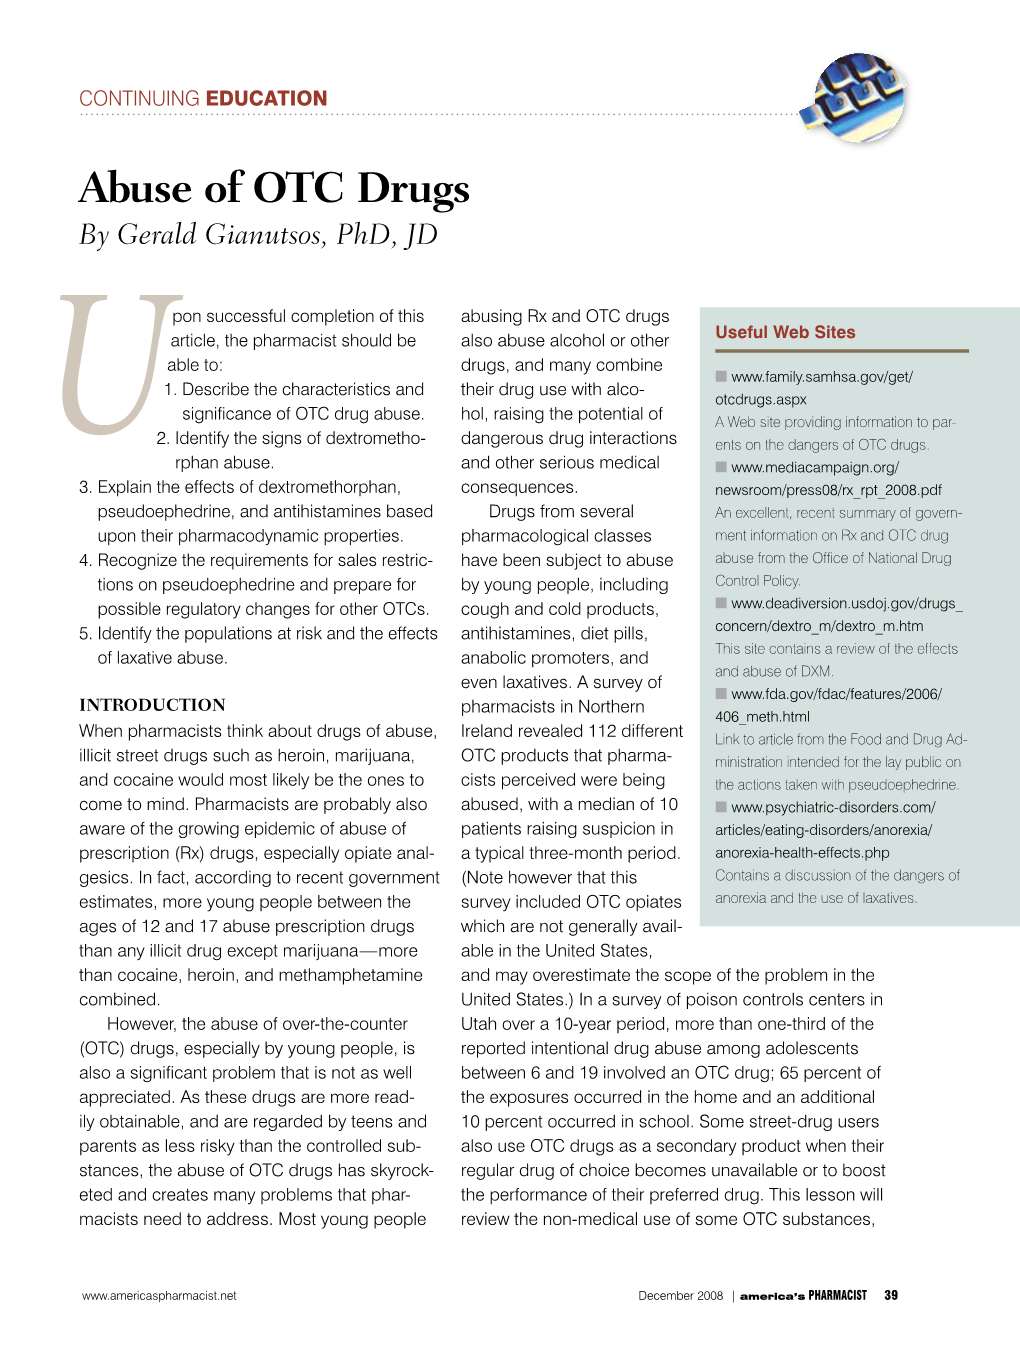 Abuse of OTC Drugs by Gerald Gianutsos, Phd, JD